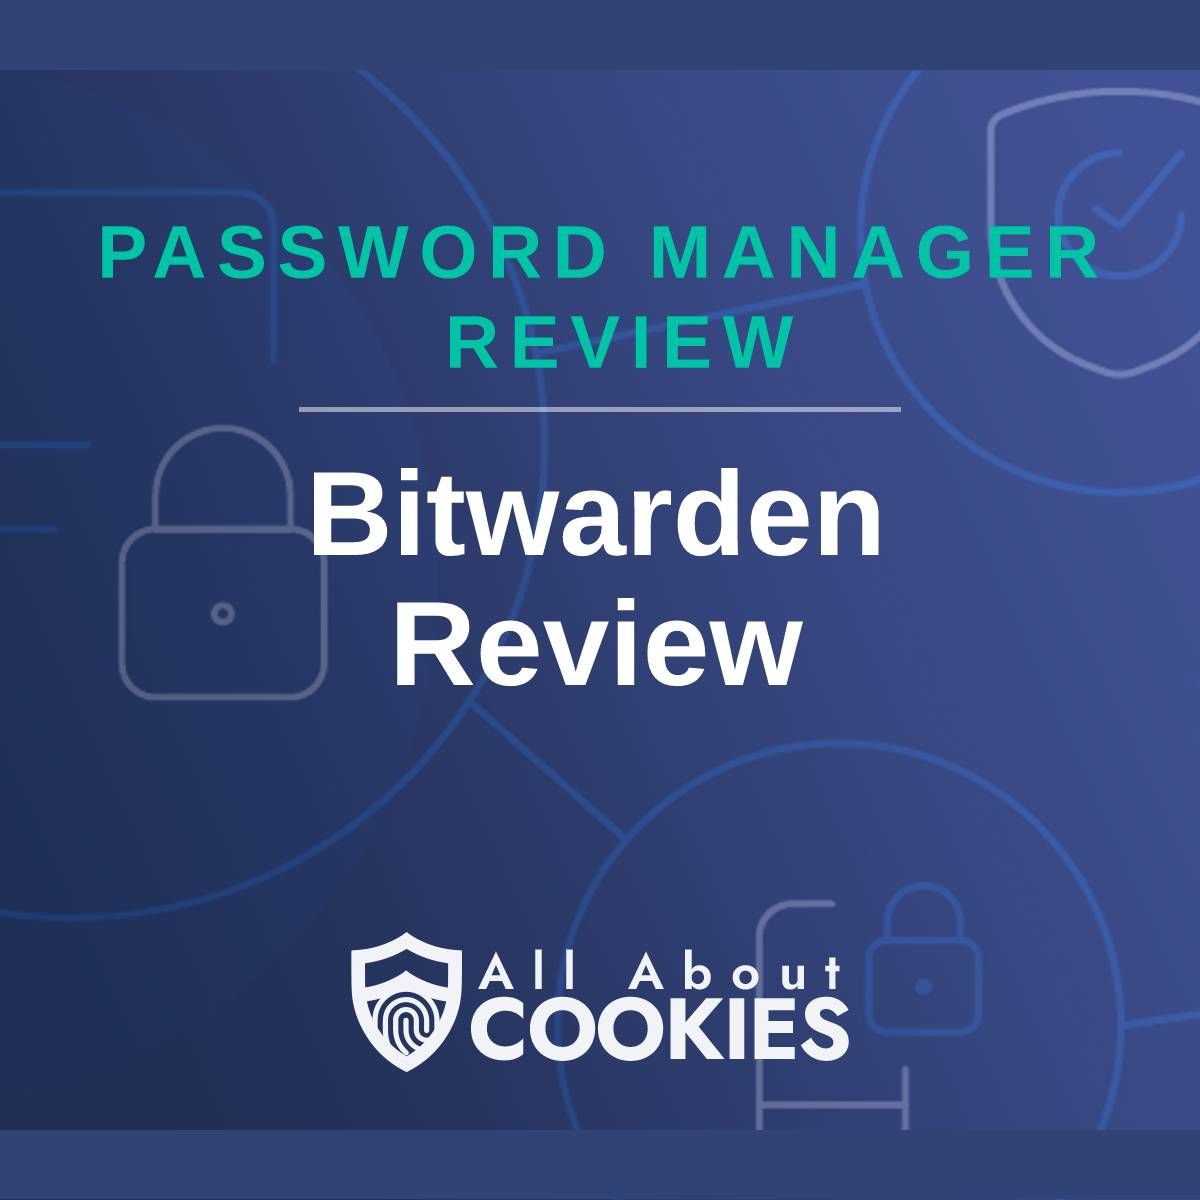 A blue background with images of locks and shields with the text &quot;Password Manager Review Bitwarden Review&quot; and the All About Cookies logo. 